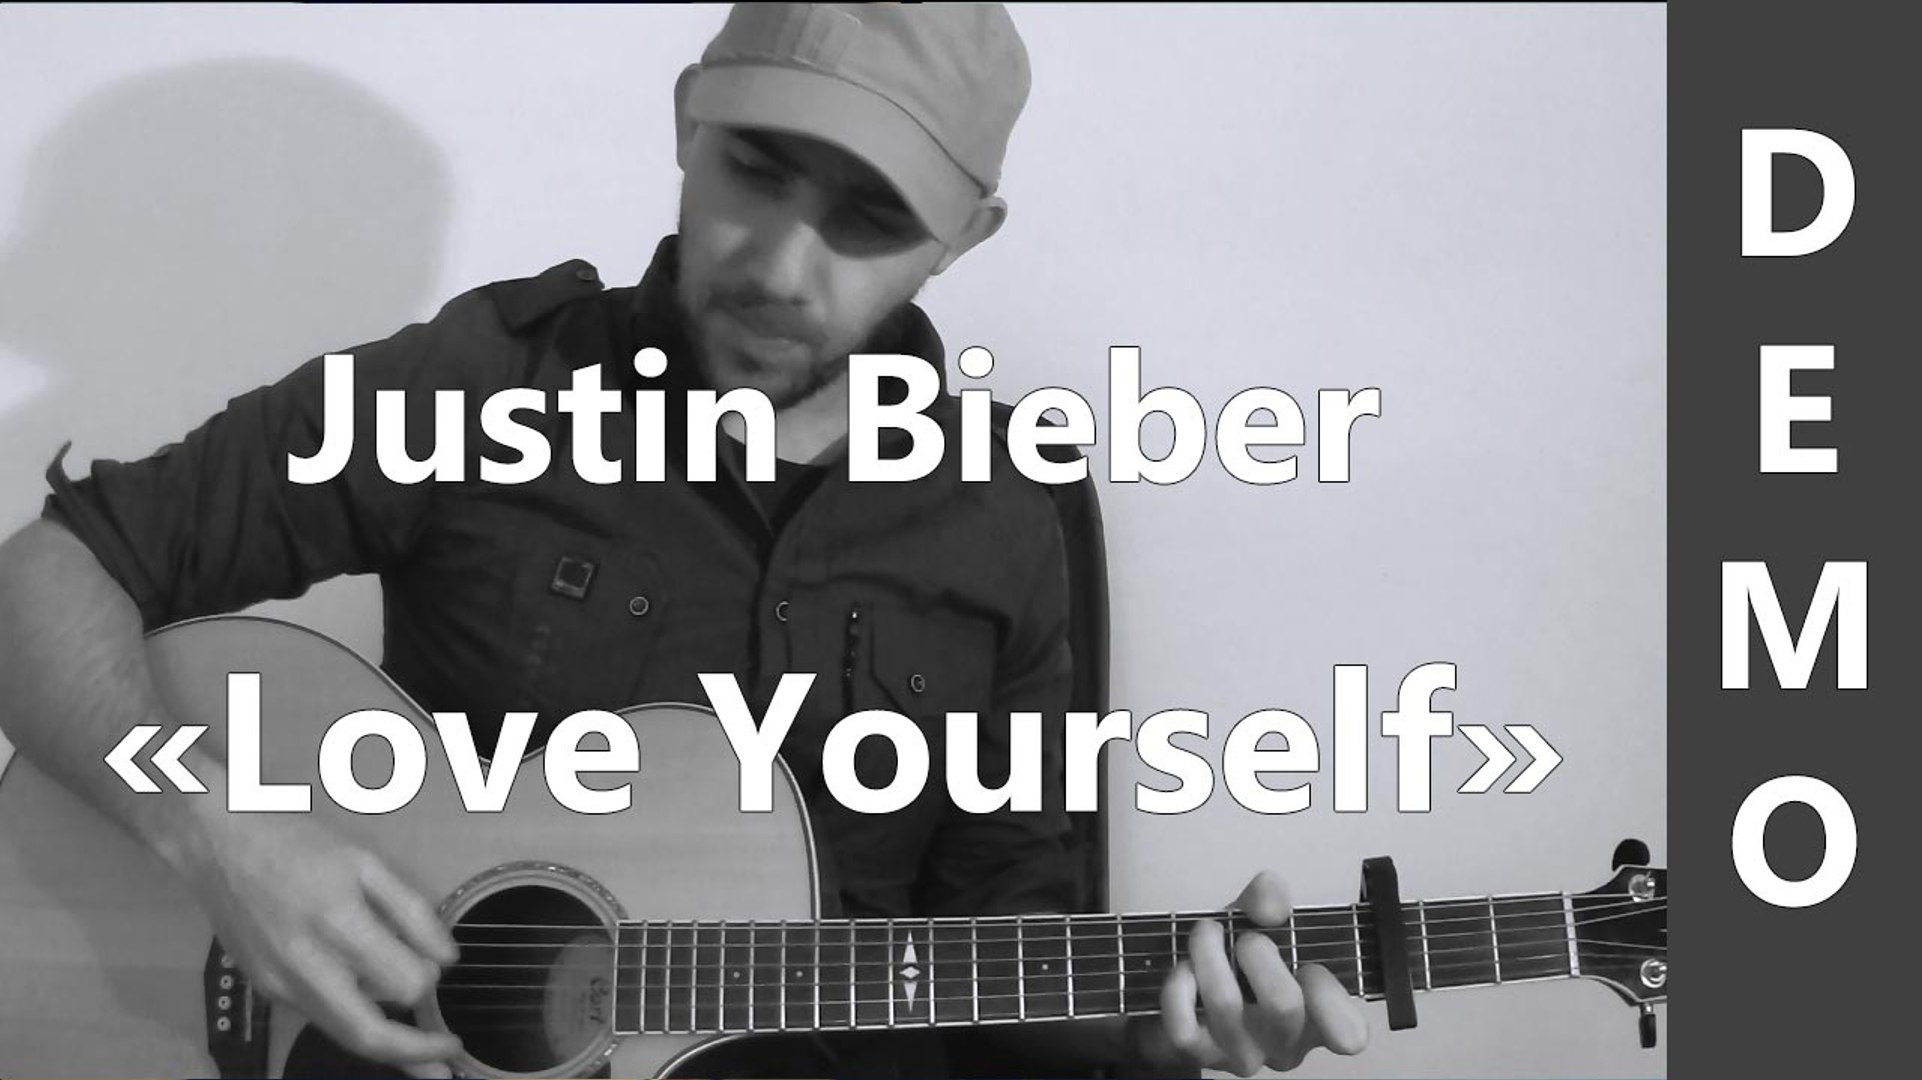 Love Yourself - Justin Bieber - Cover Guitare - Vidéo Dailymotion